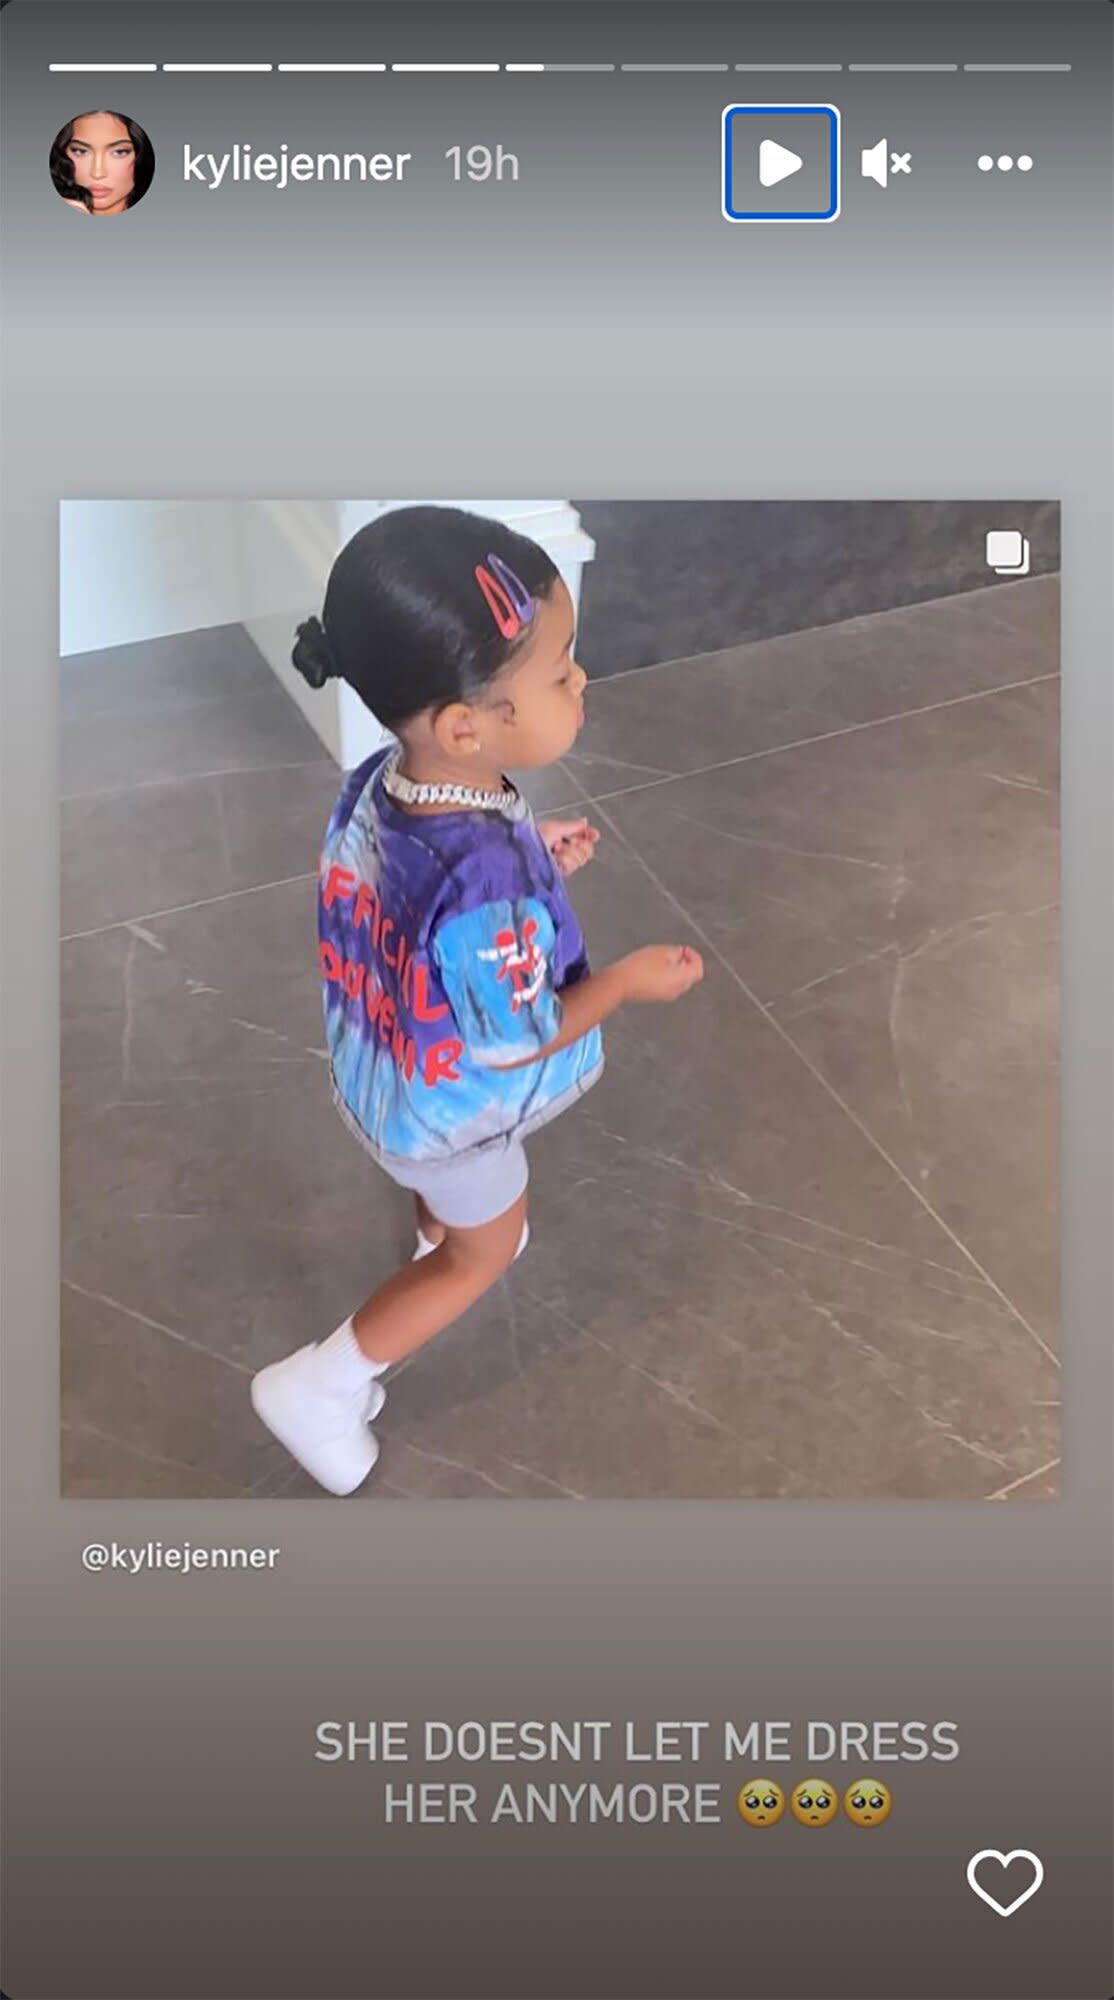 Kylie Jenner Posts Throwback Stormi Outfits and Admits 'She Doesn't Let Me Dress Her Anymore'. https://www.instagram.com/kyliejenner/.